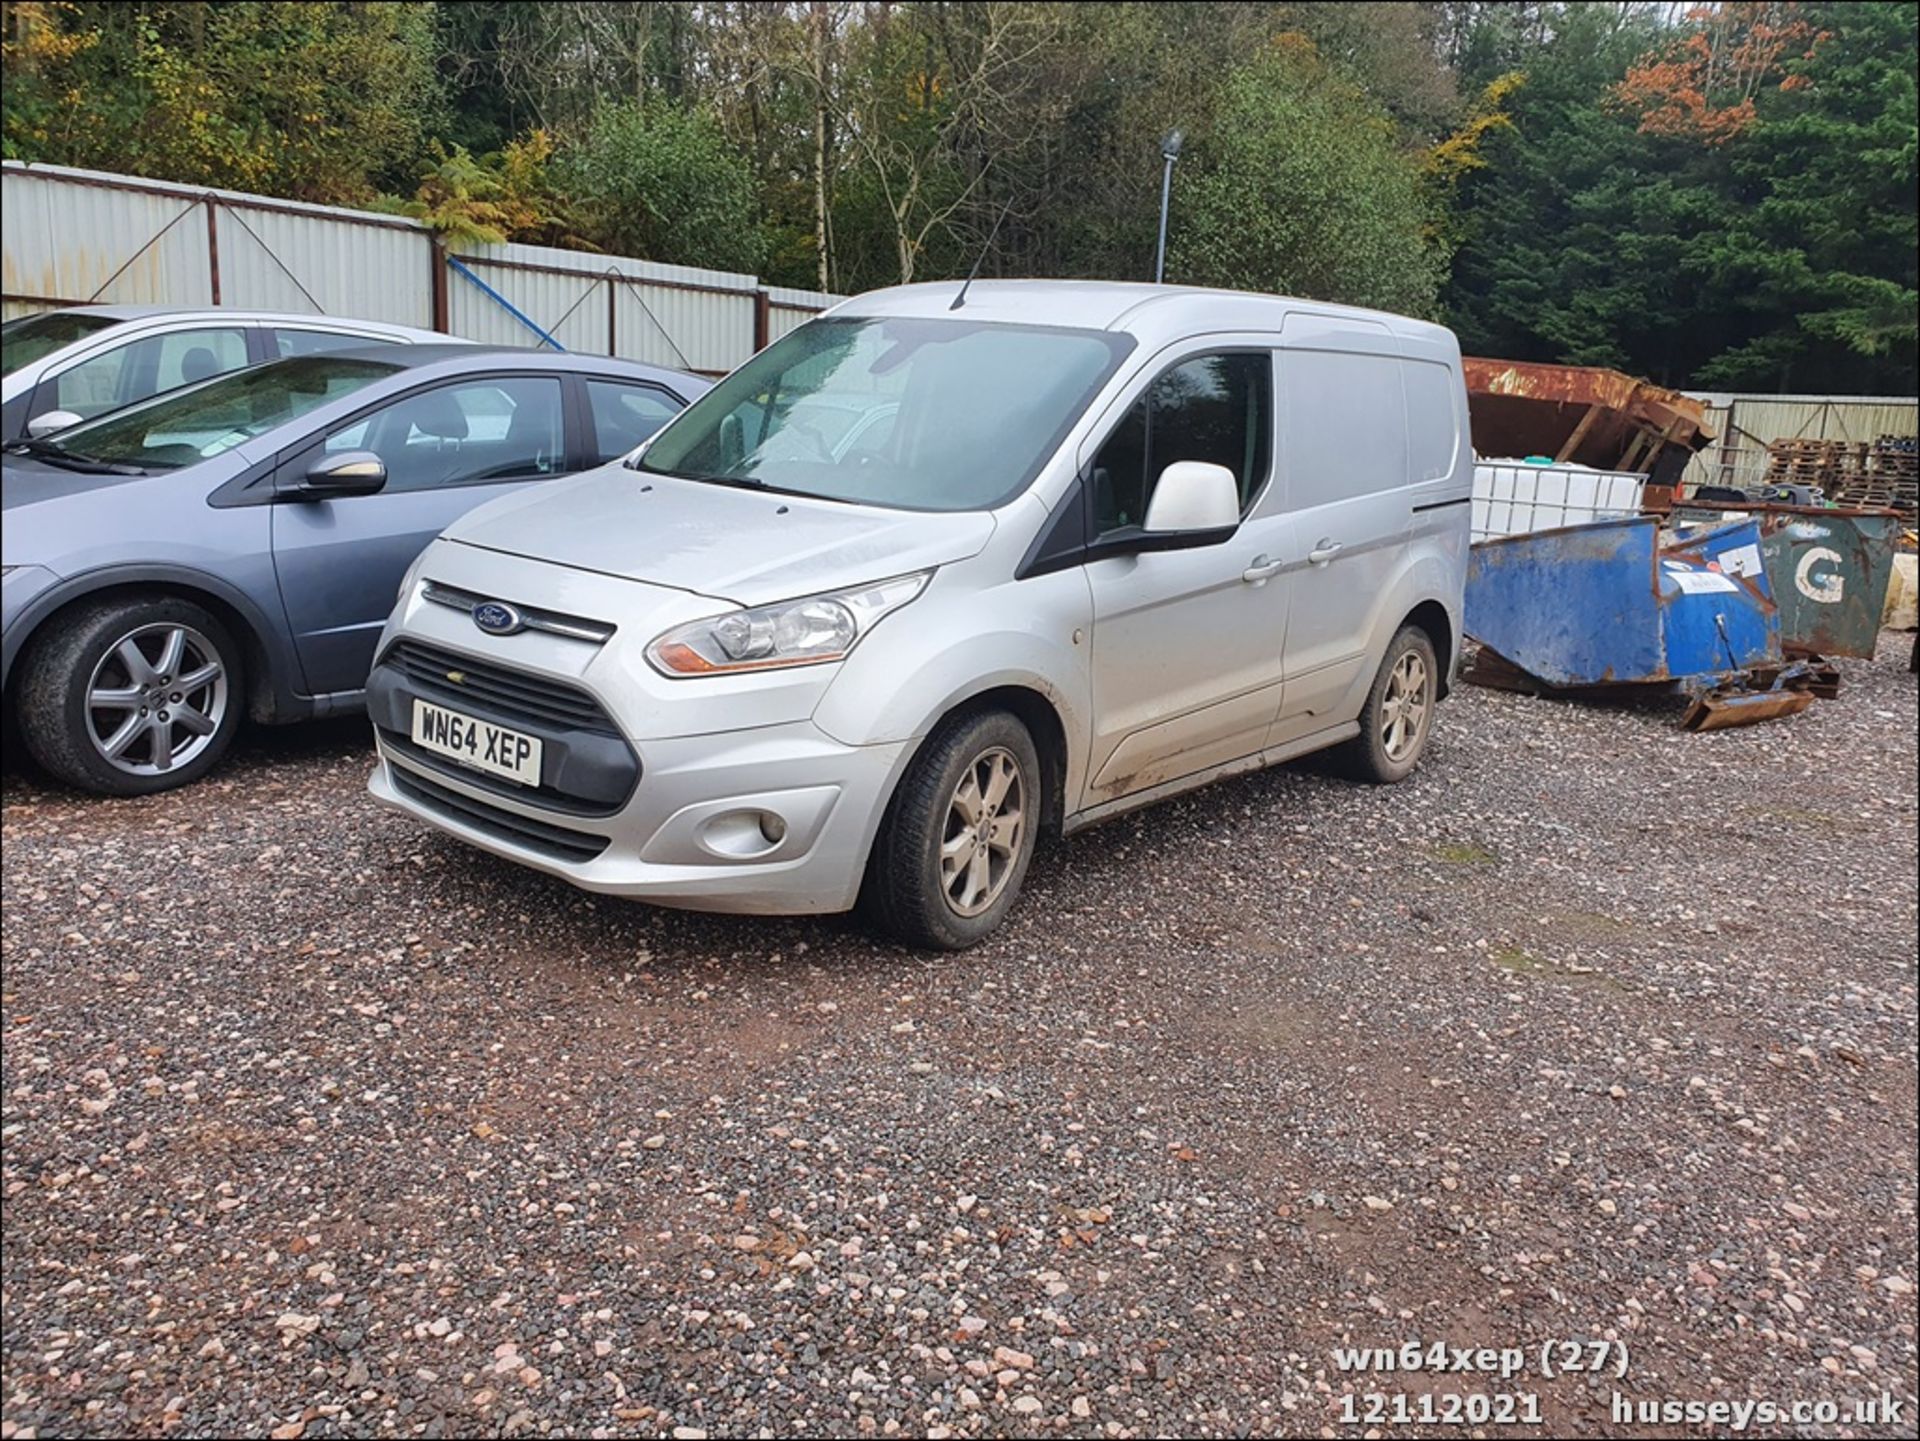 14/64 FORD TRANSIT CONNECT 200 LIMIT - 1560cc 5dr Van (Silver, 82k) - Image 27 of 27